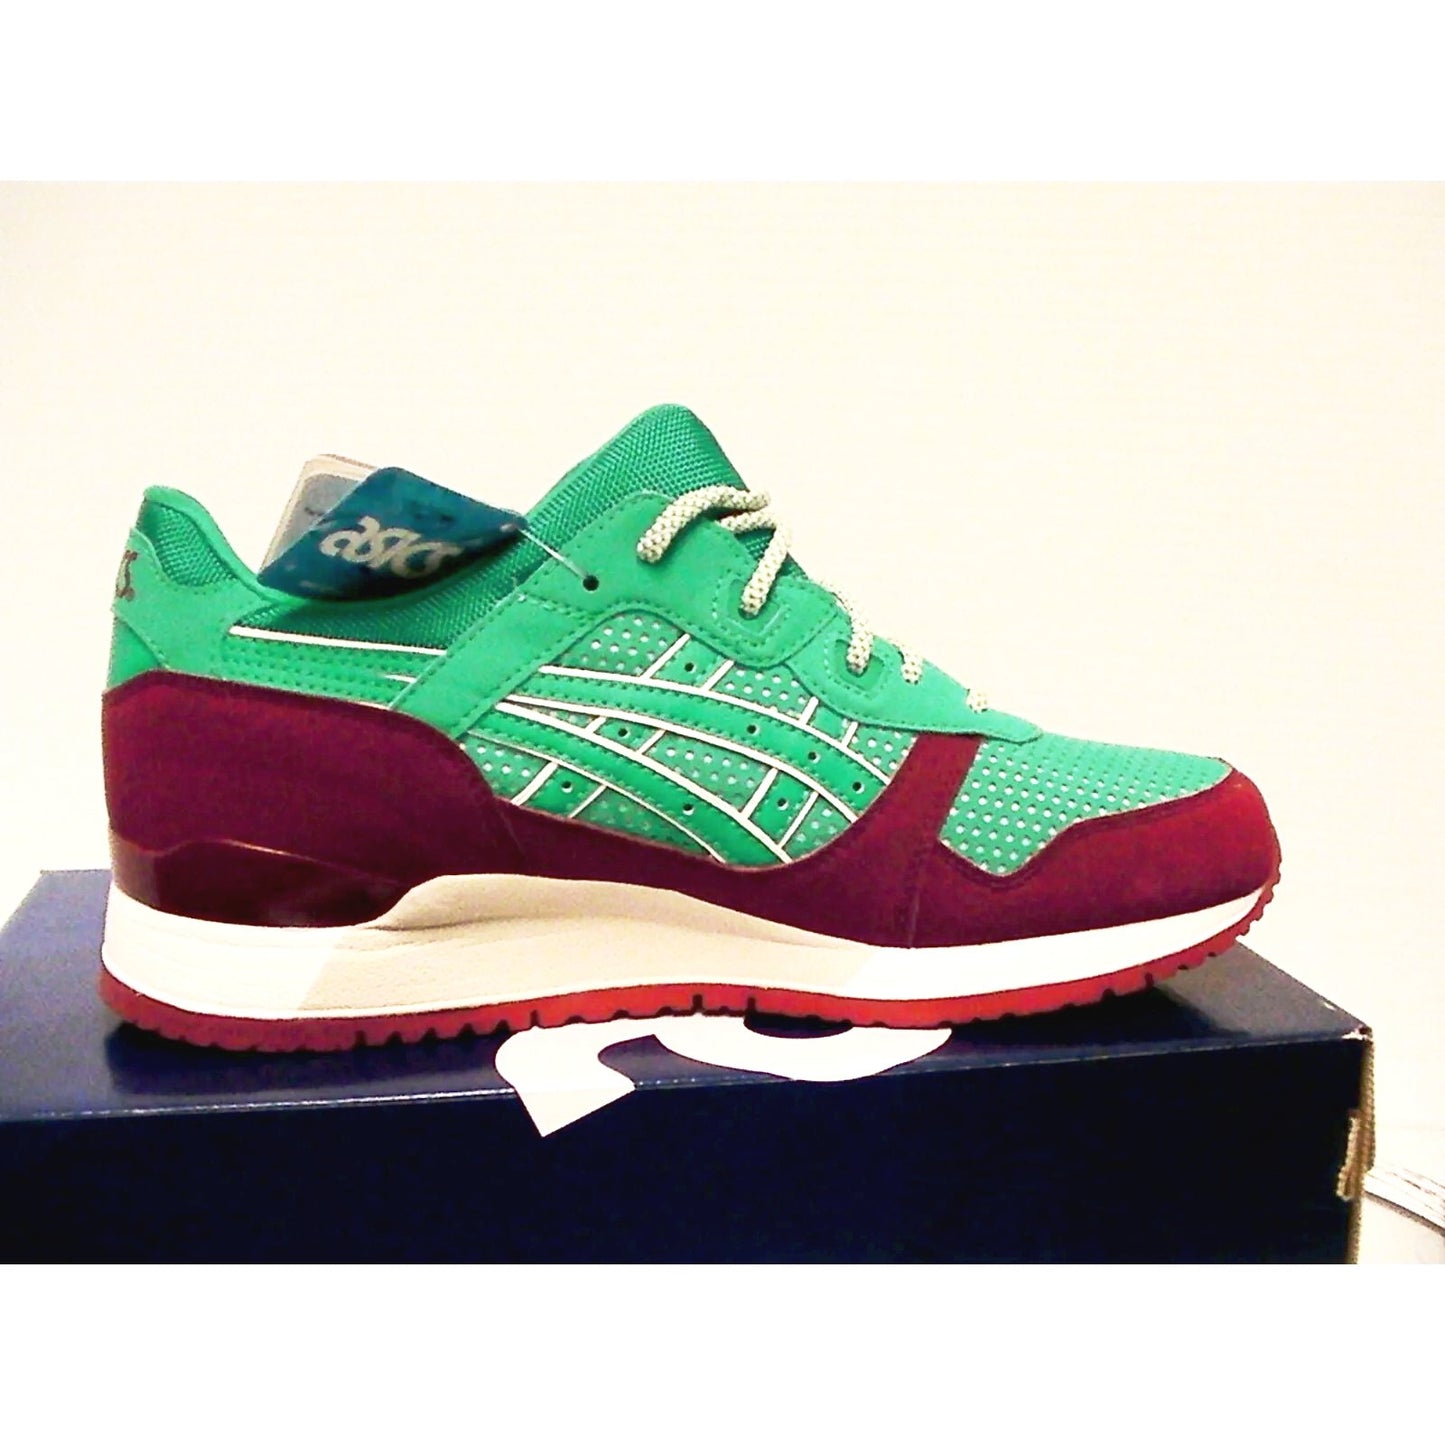 Asics running shoes gel-lyte iii size 8 us men spectra green new with box - Classic Fashion DealsAsics running shoes gel-lyte iii size 8 us men spectra green new with boxShoesASICSClassic Fashion Deals